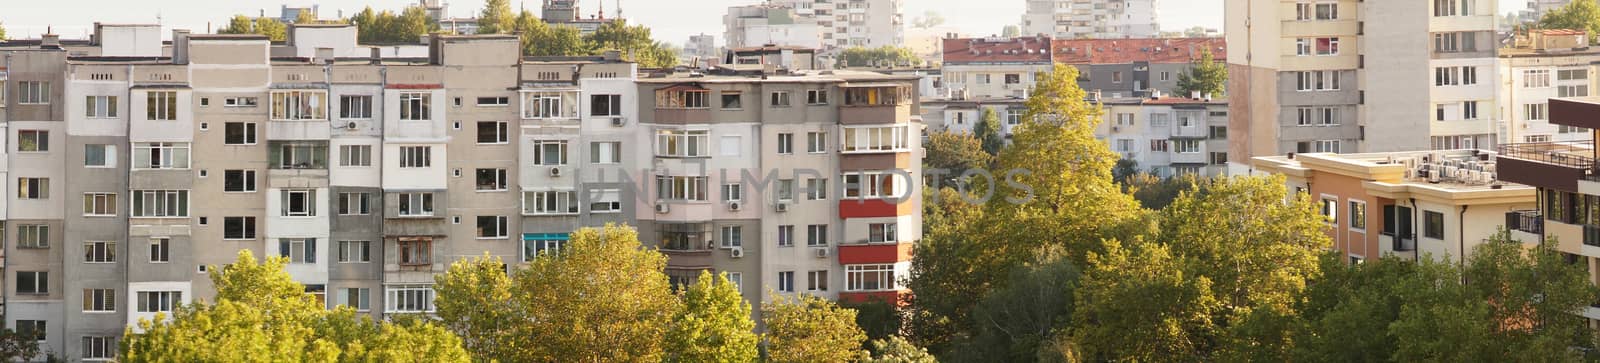 fragment of the facade of multi-storey residential buildings, panoramic photo.